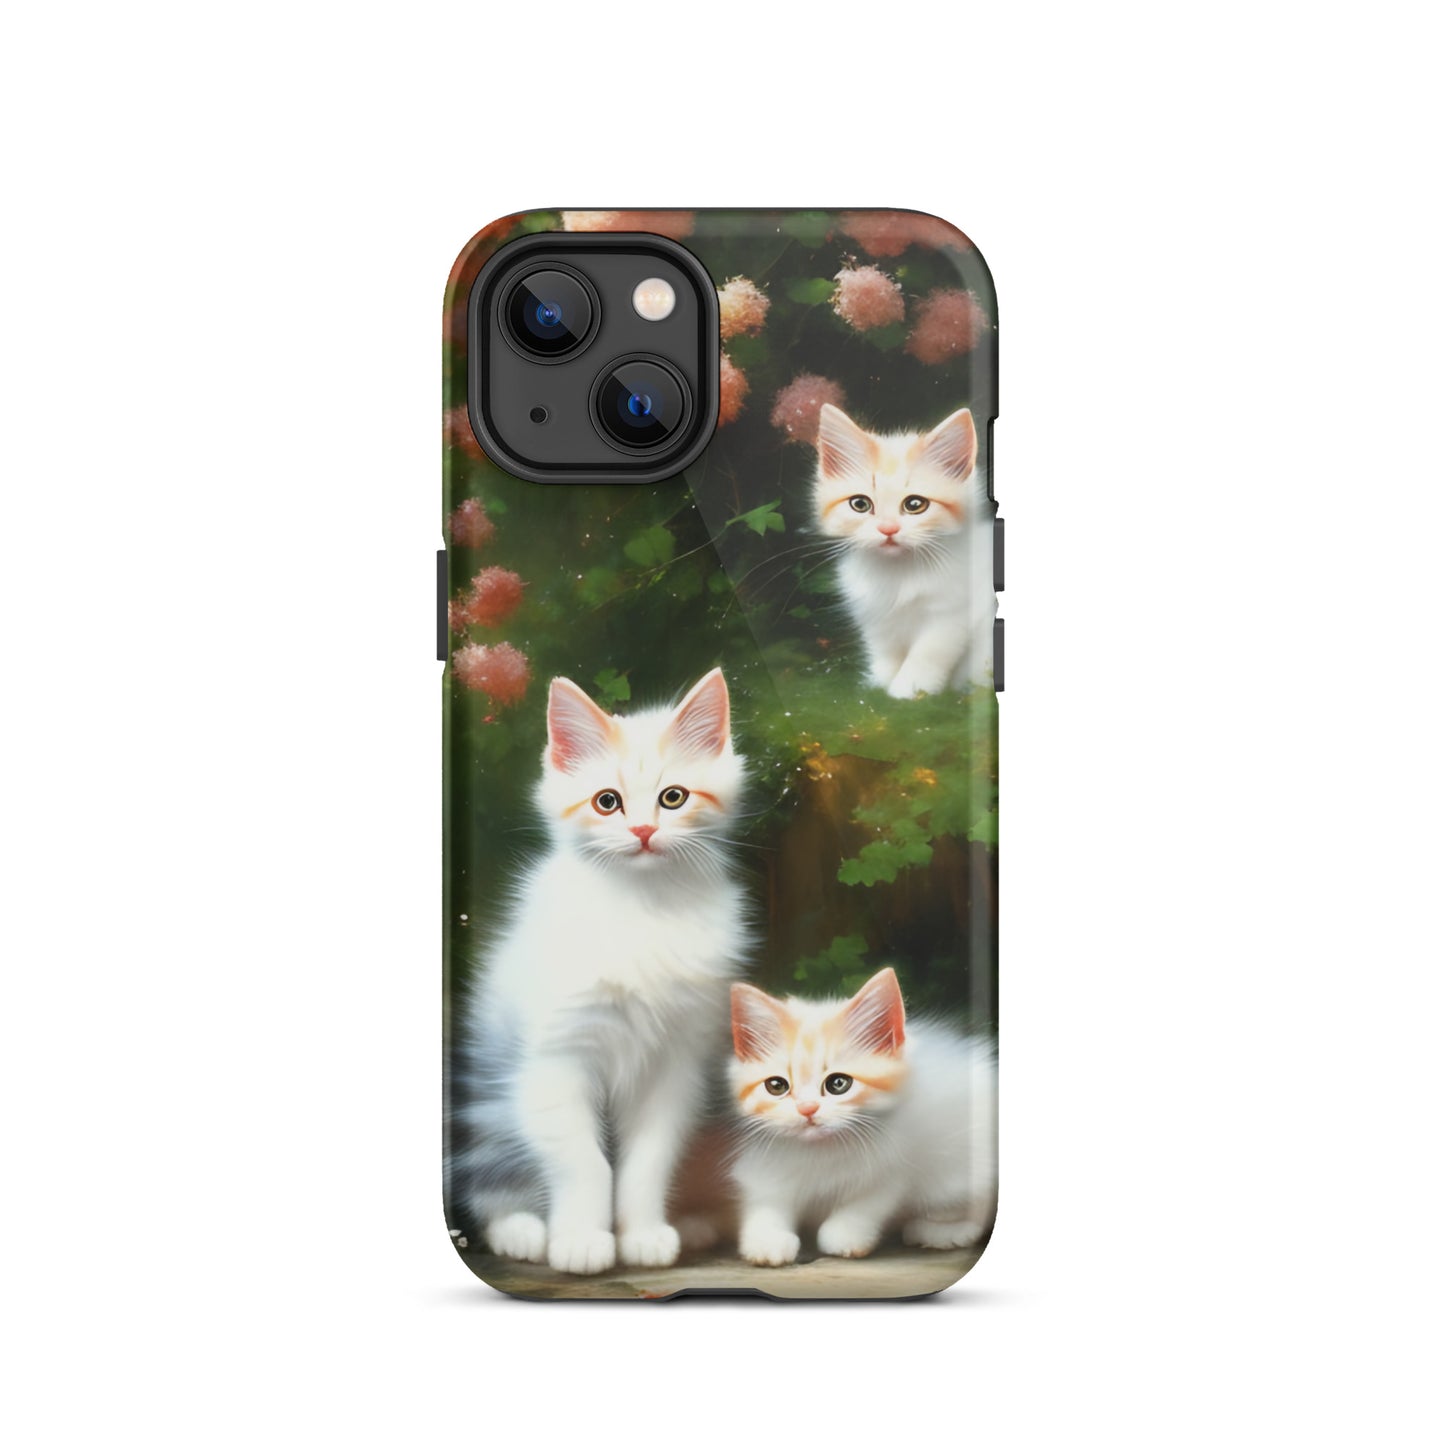 A picture of a iphone tough case with 3 fluffy white and orange kittens and peach colored flowers in the background - glossy-iphone-13-front